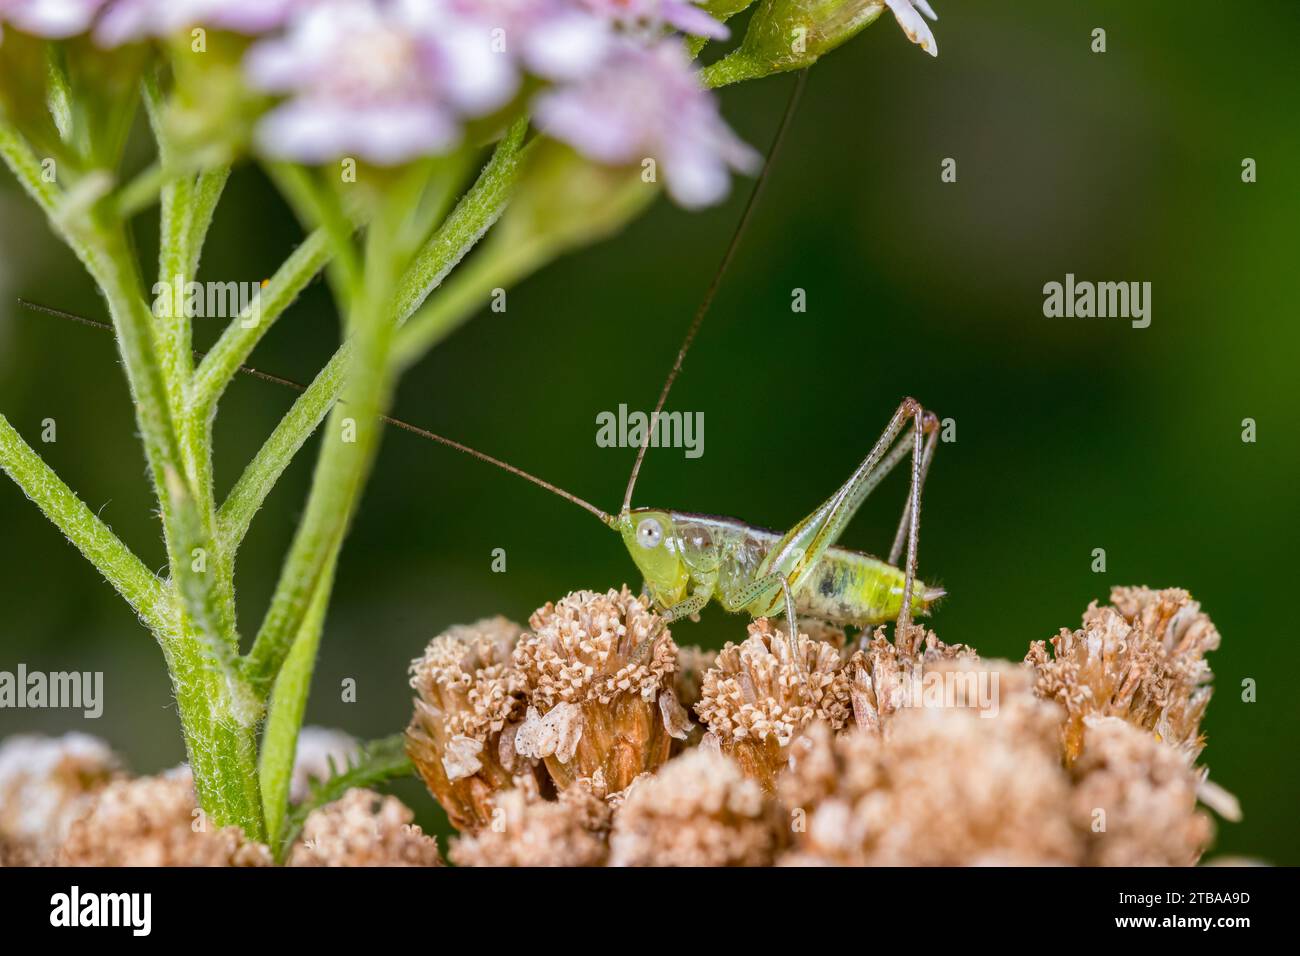 Slender Meadow Katydid on wildflower plant. Insect and wildlife conservation, agriculture and garden pest control concept. Stock Photo